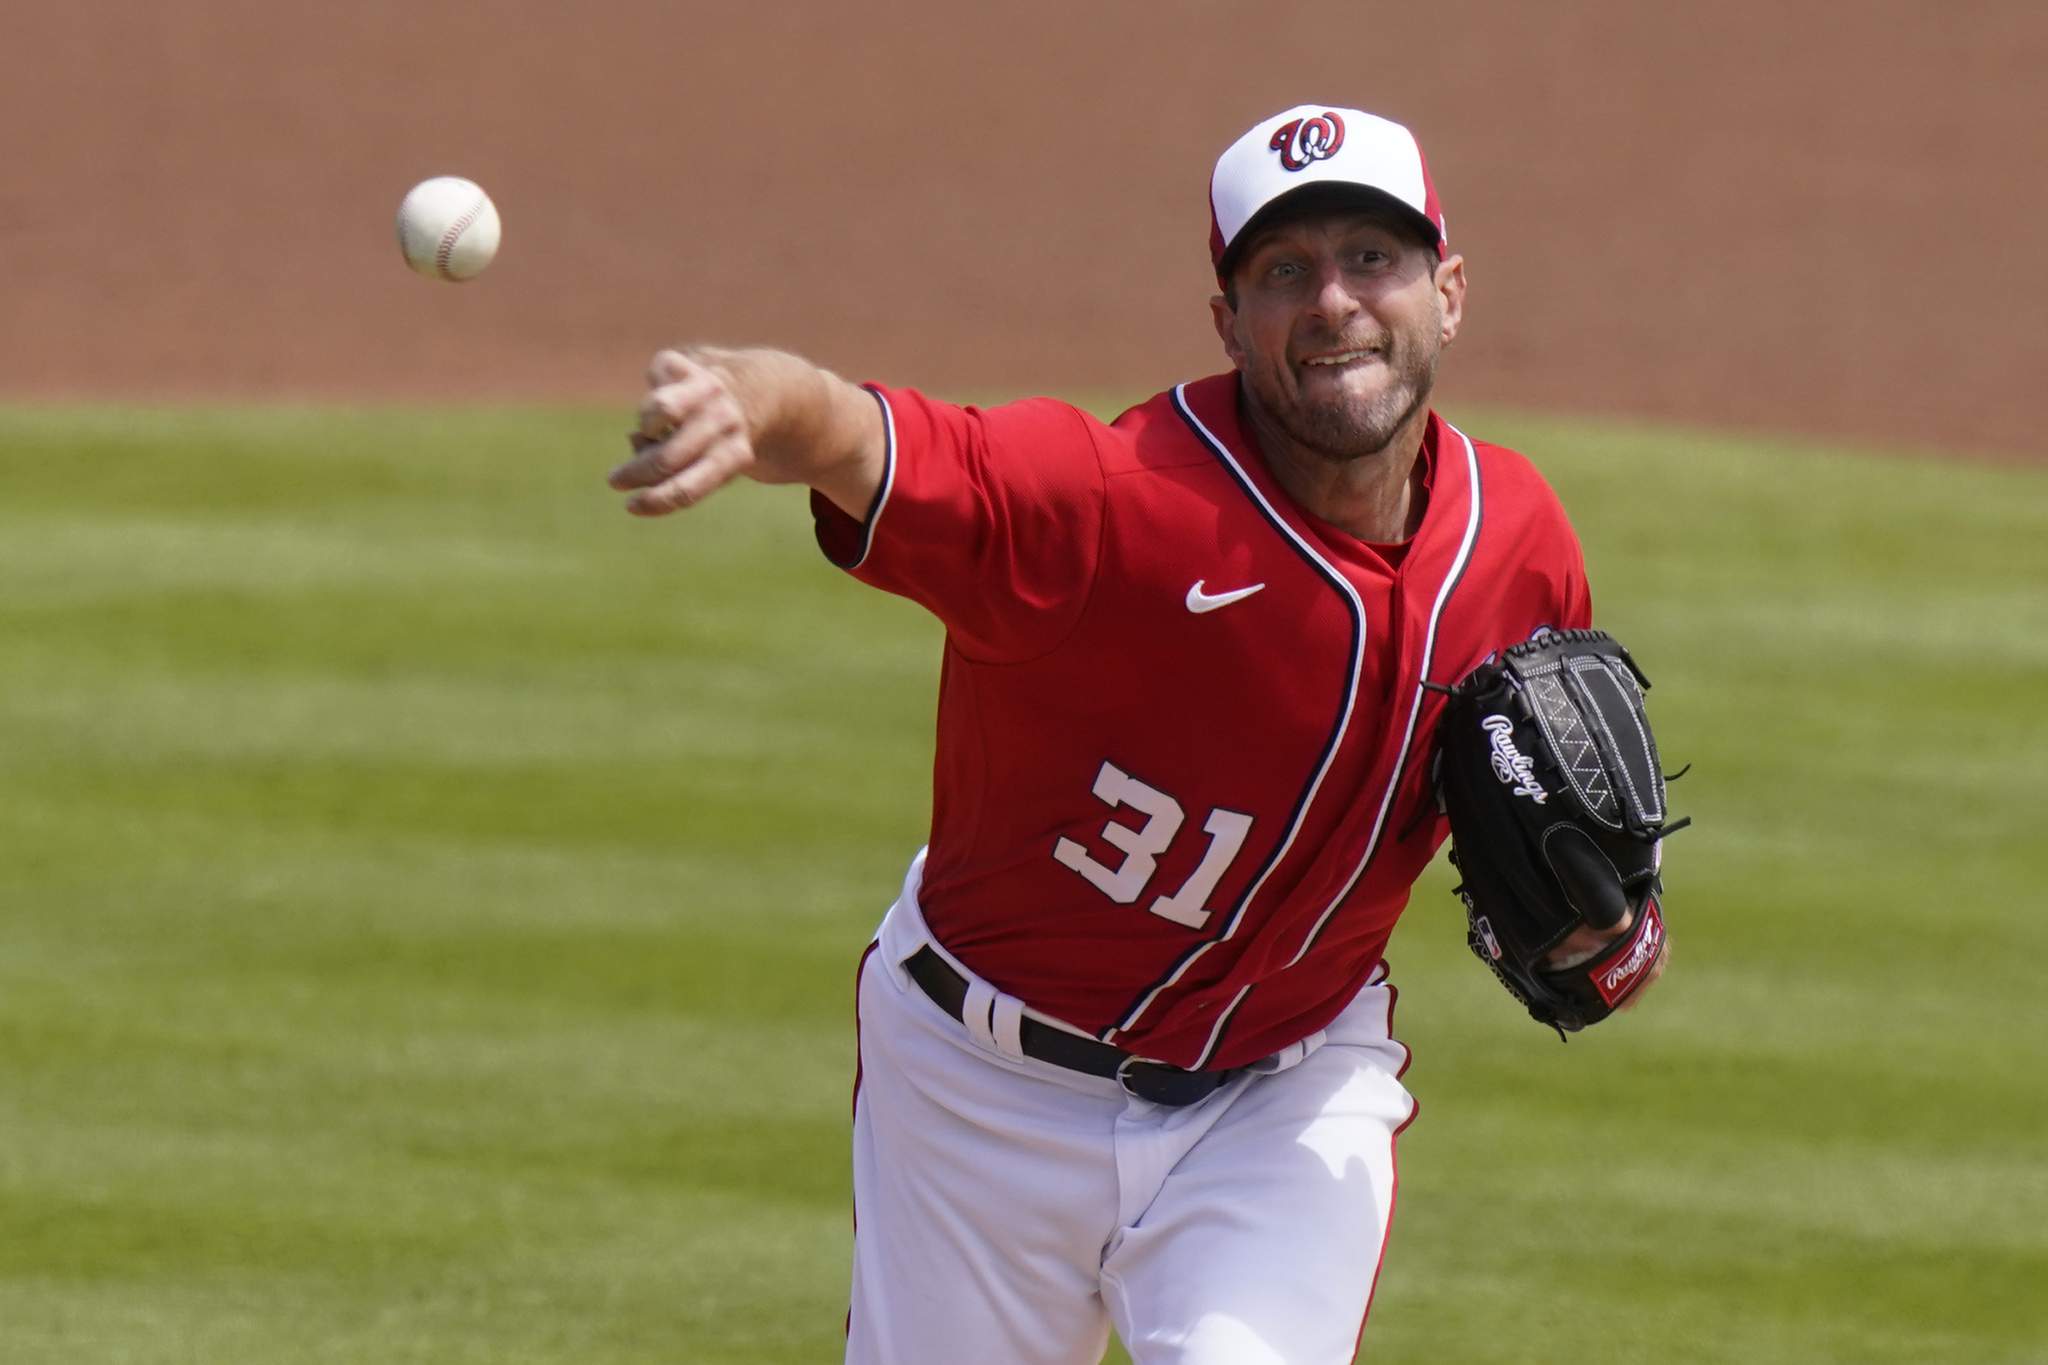 Scherzer faces deGrom in spring game, rematch on opening day